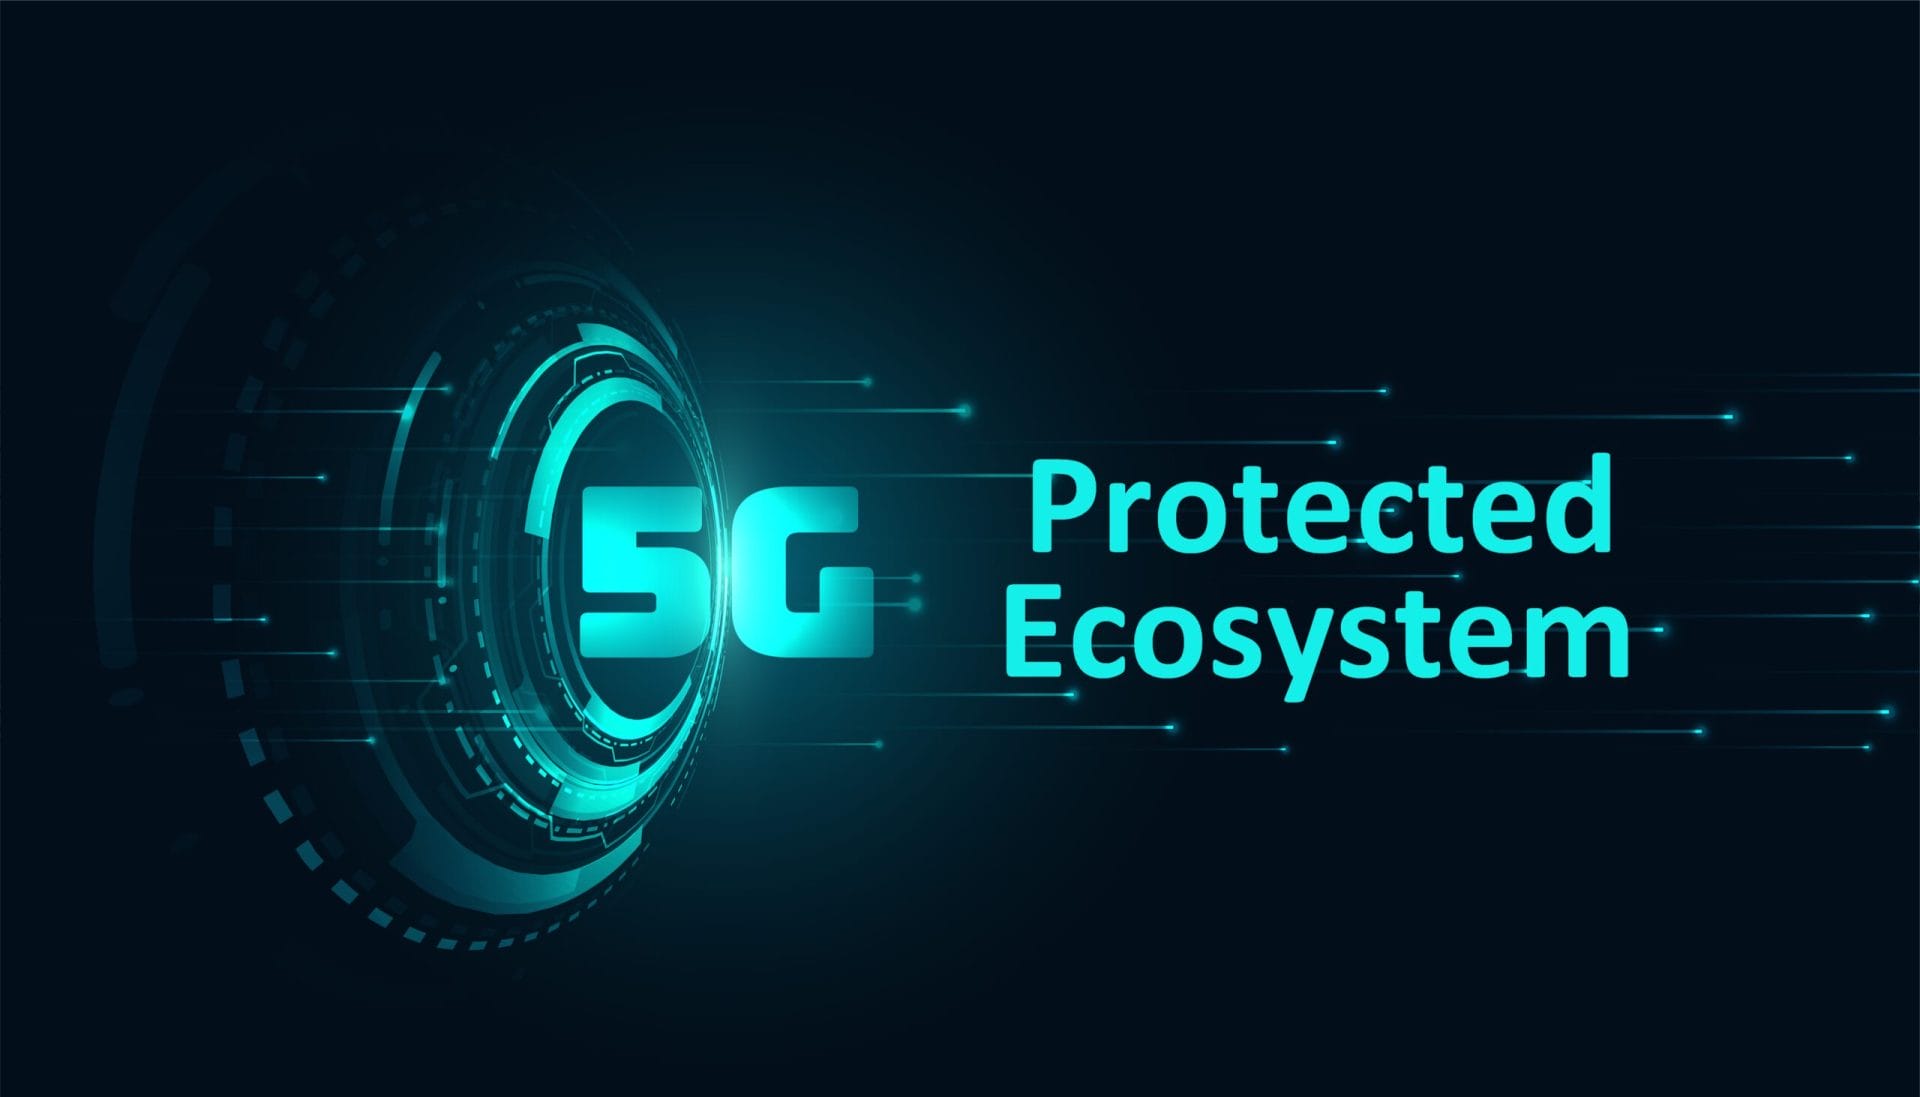 5g protected